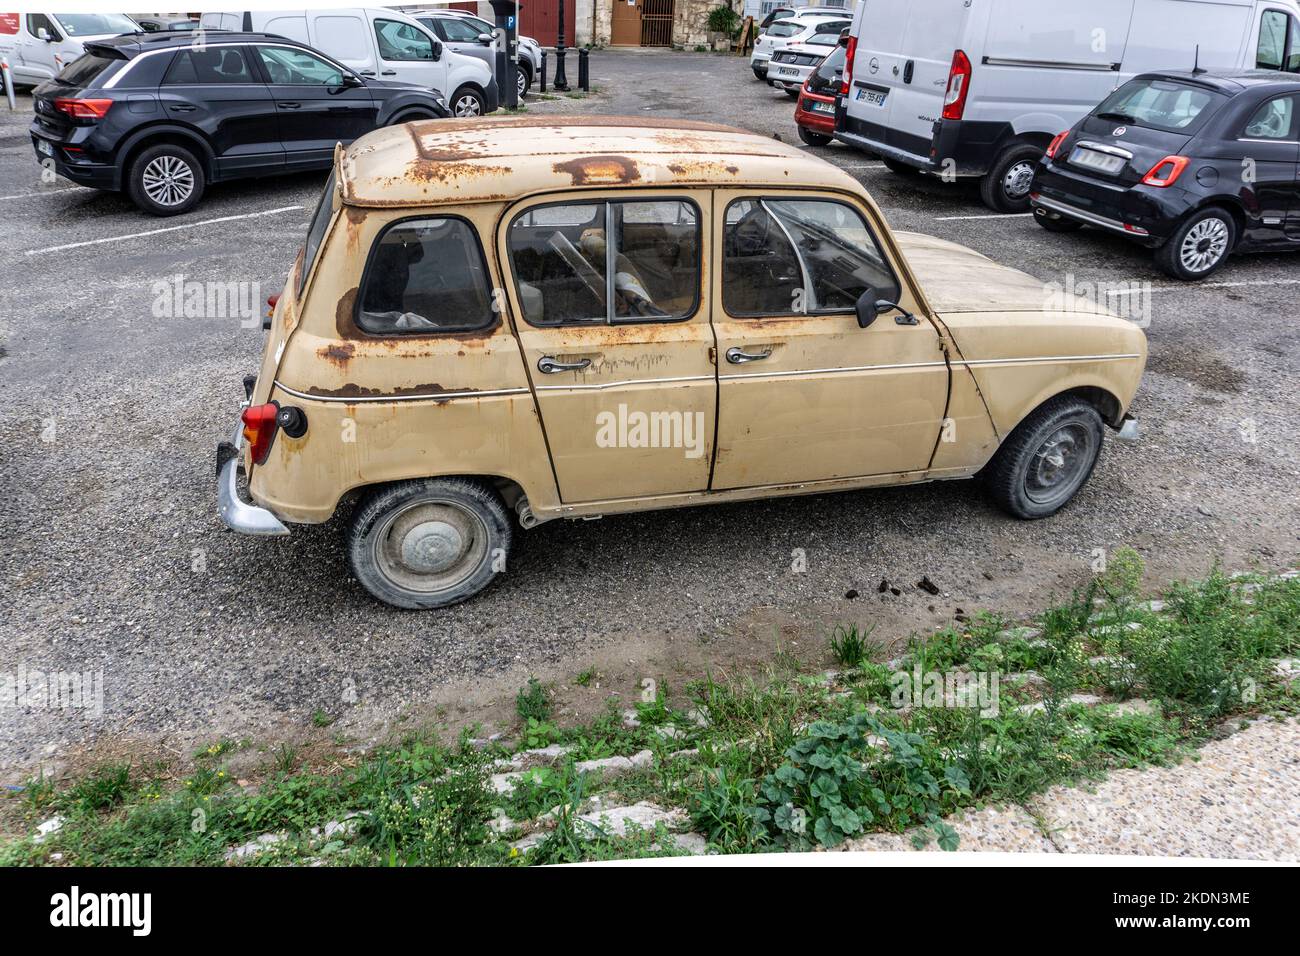 An old rusty Renault 4 car which has seen happier days. Stock Photo